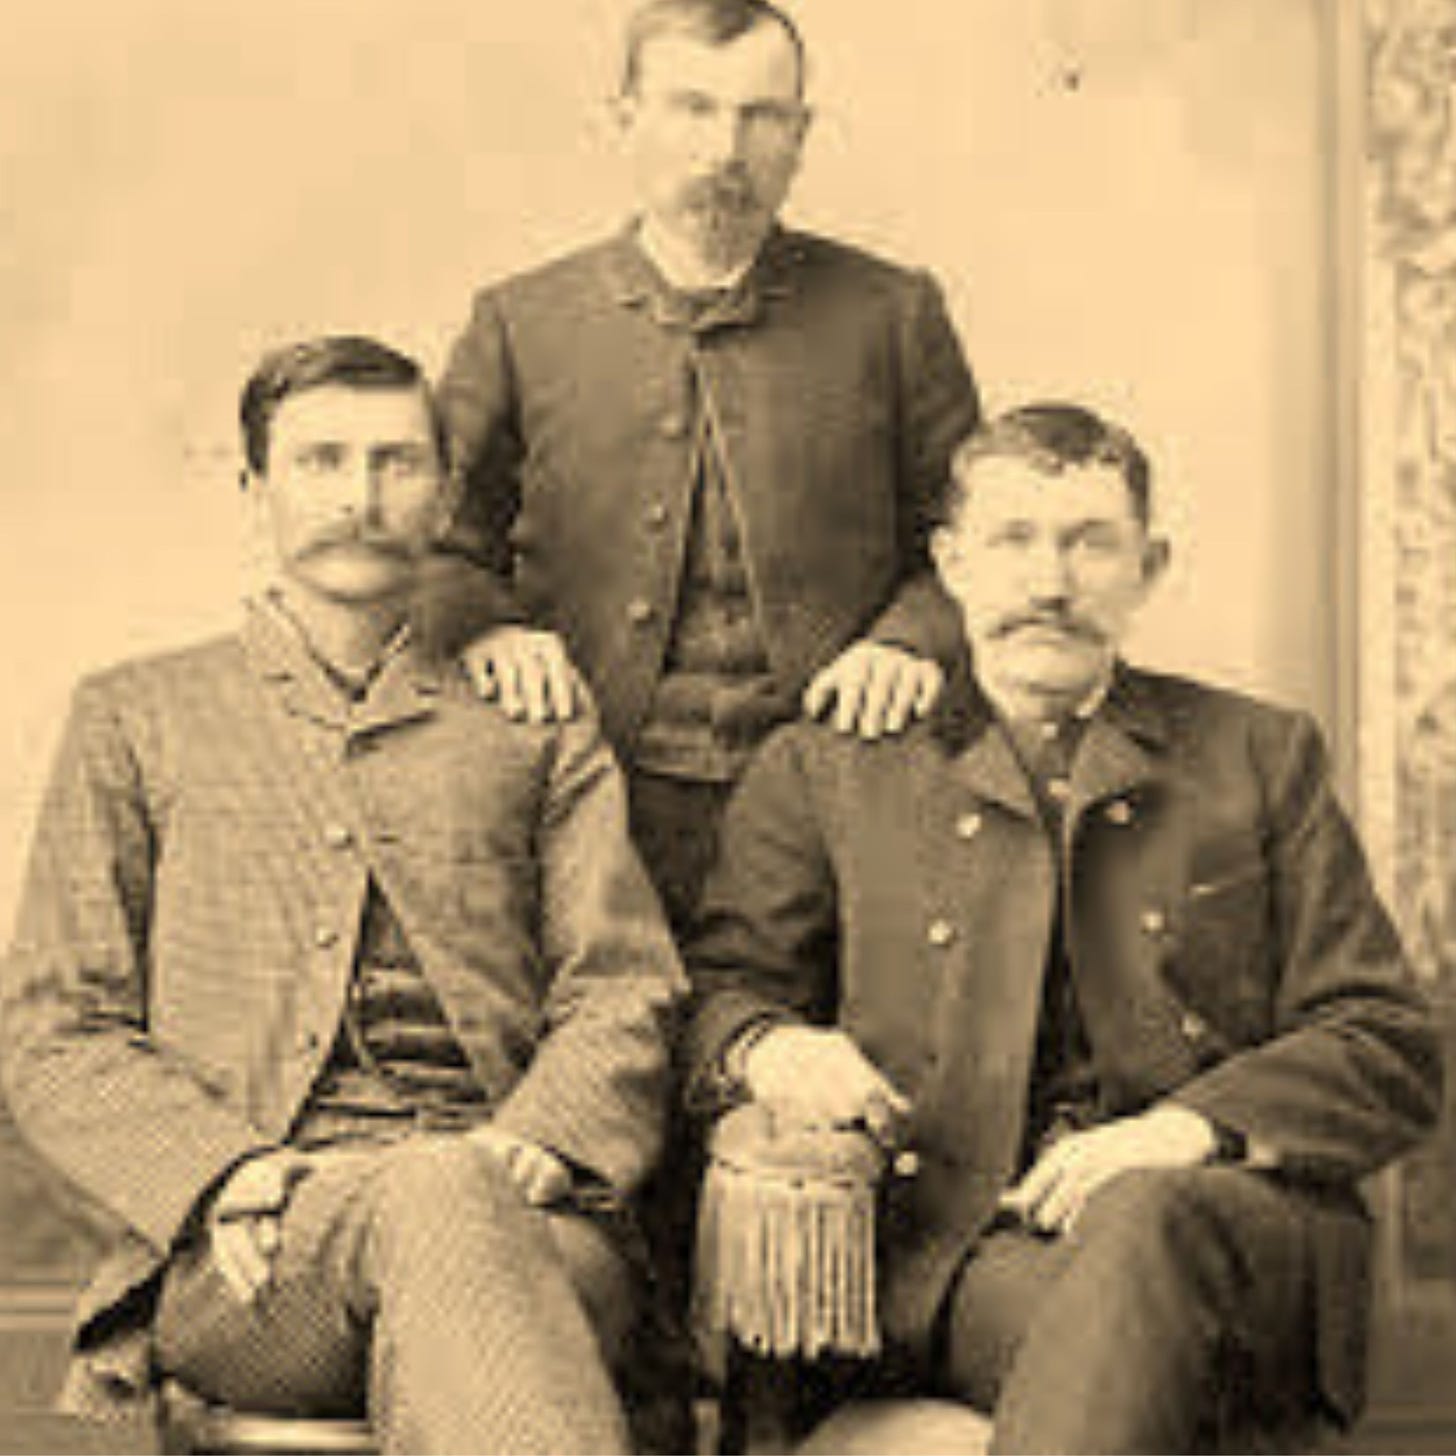 Photo of Pat Garrett and John W. Poe seated, with another lawman James Brent standing